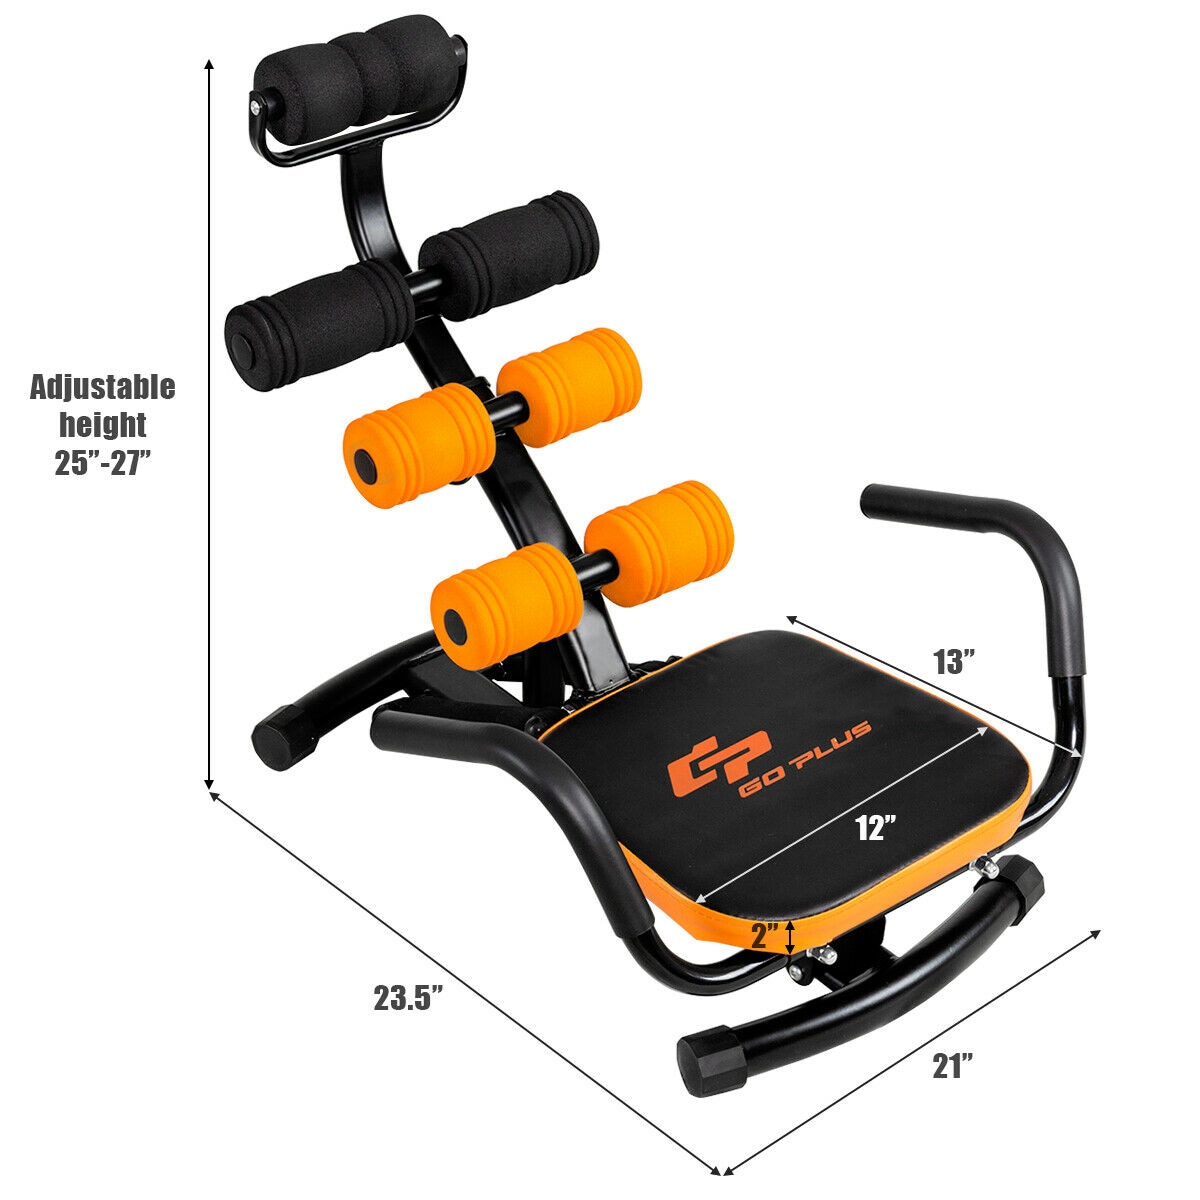 BODY RHYTHM Dual-track Ab Workout Machine with 4 Adjustable Heights,  Foldable Core & Abdominal Exercise Machine with 330lbs Weight Capacity,  Total Ab